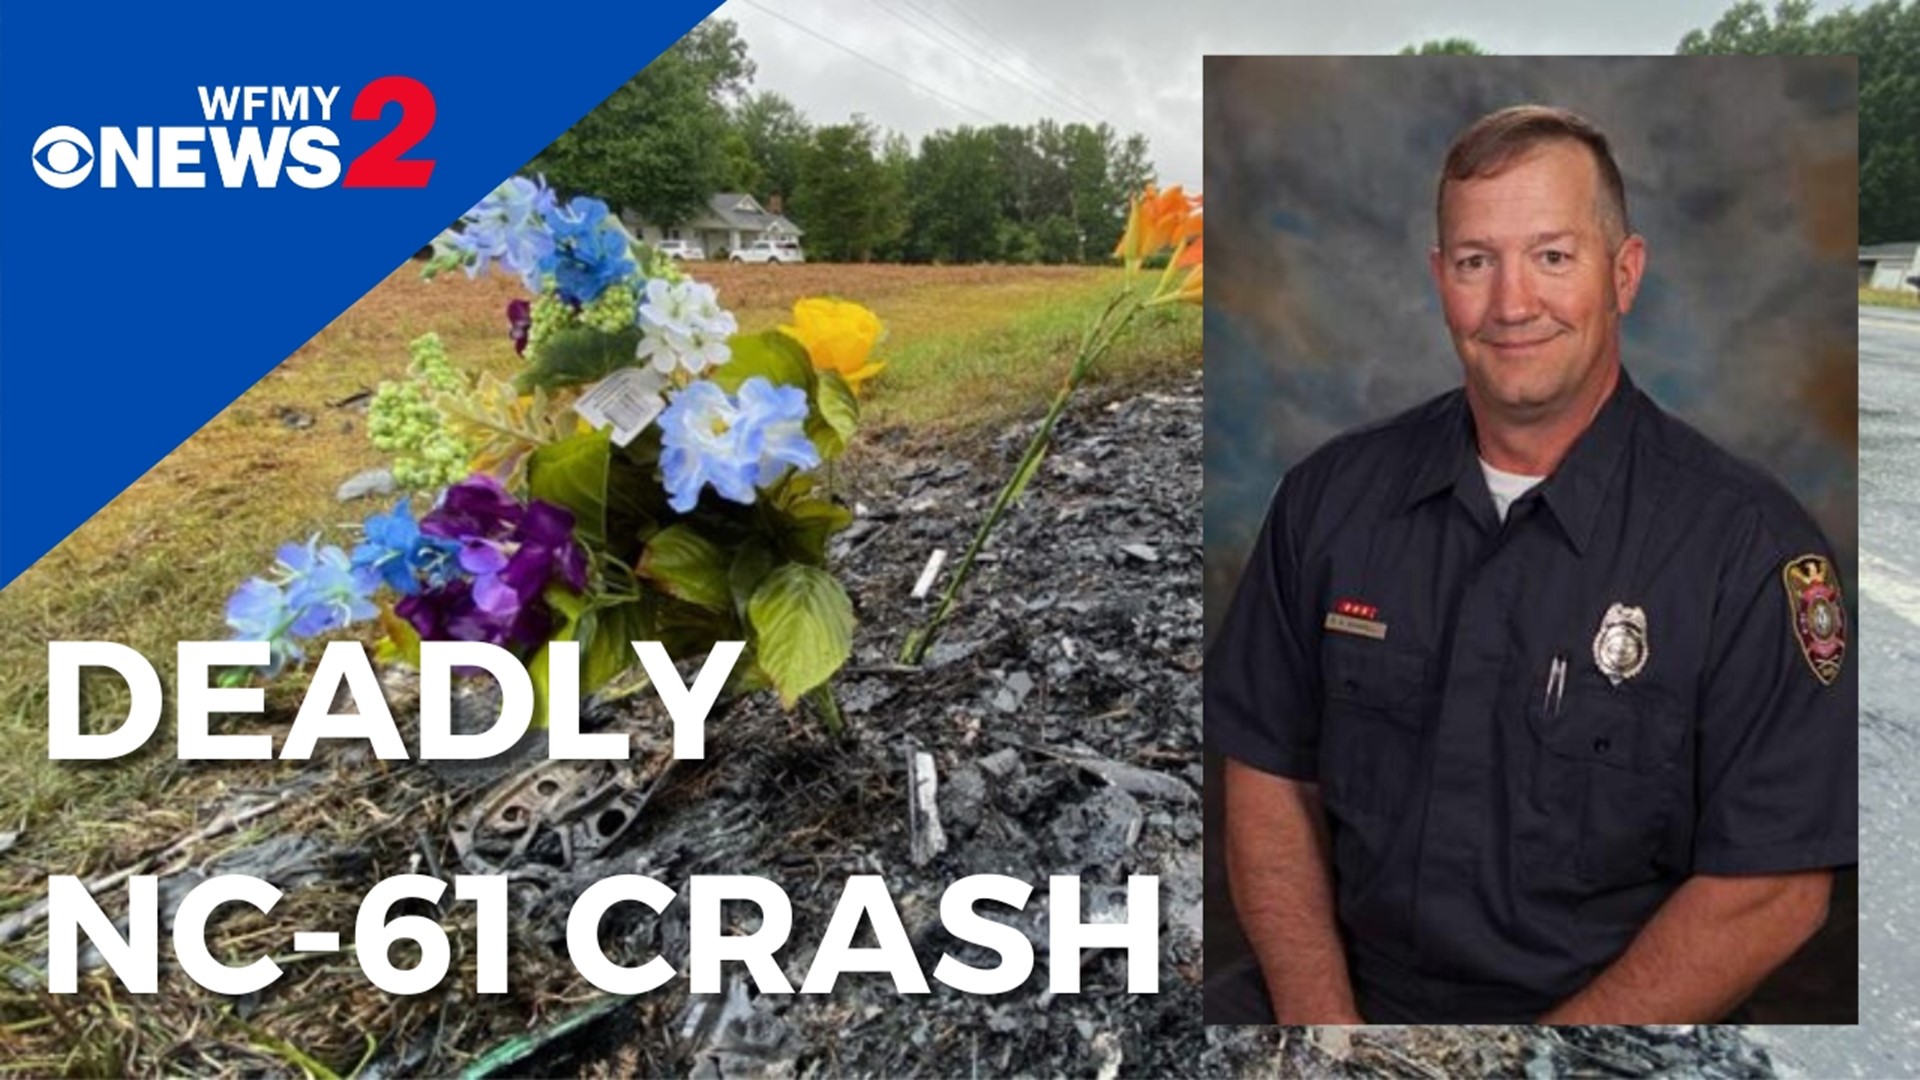 33-year GFD veteran Richard Murrell and two others were killed in a crash on NC 61 Saturday evening. Two others went to the hospital with serious injuries.